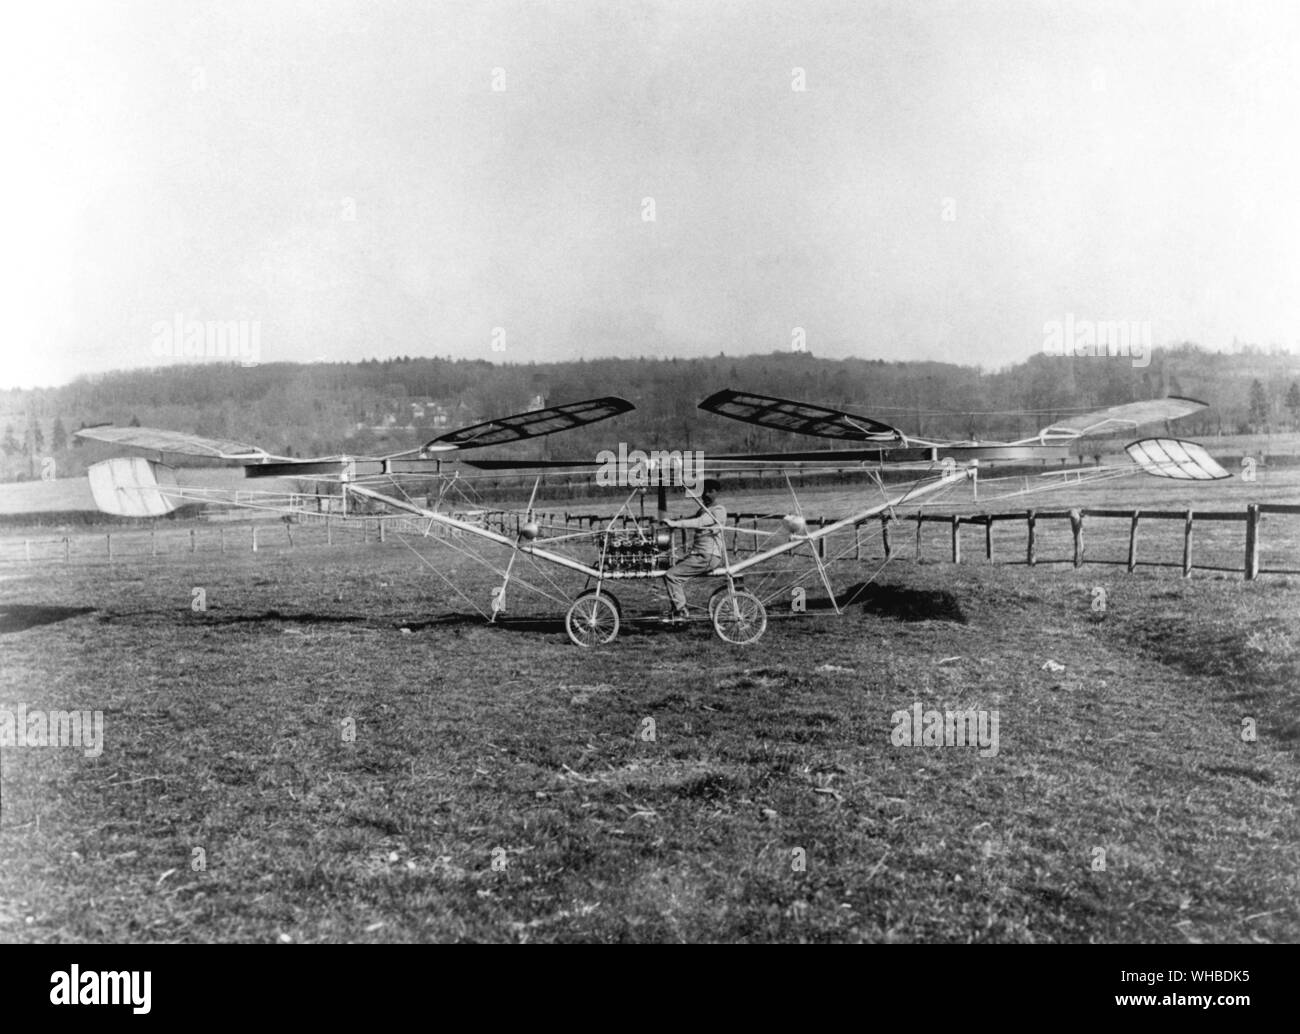 Paul Cornu's helicopter 1907 - the first helicopter to achieve free flight, a twin-rotor machine designed by French cycle-dealer Paul Cornu and test flown at Lisieux on 13 November 1907. Forwarded by a 24hp Antoinette engine, the machine attained a maximum of 20sec in the air at a height of 6ft.. Stock Photo